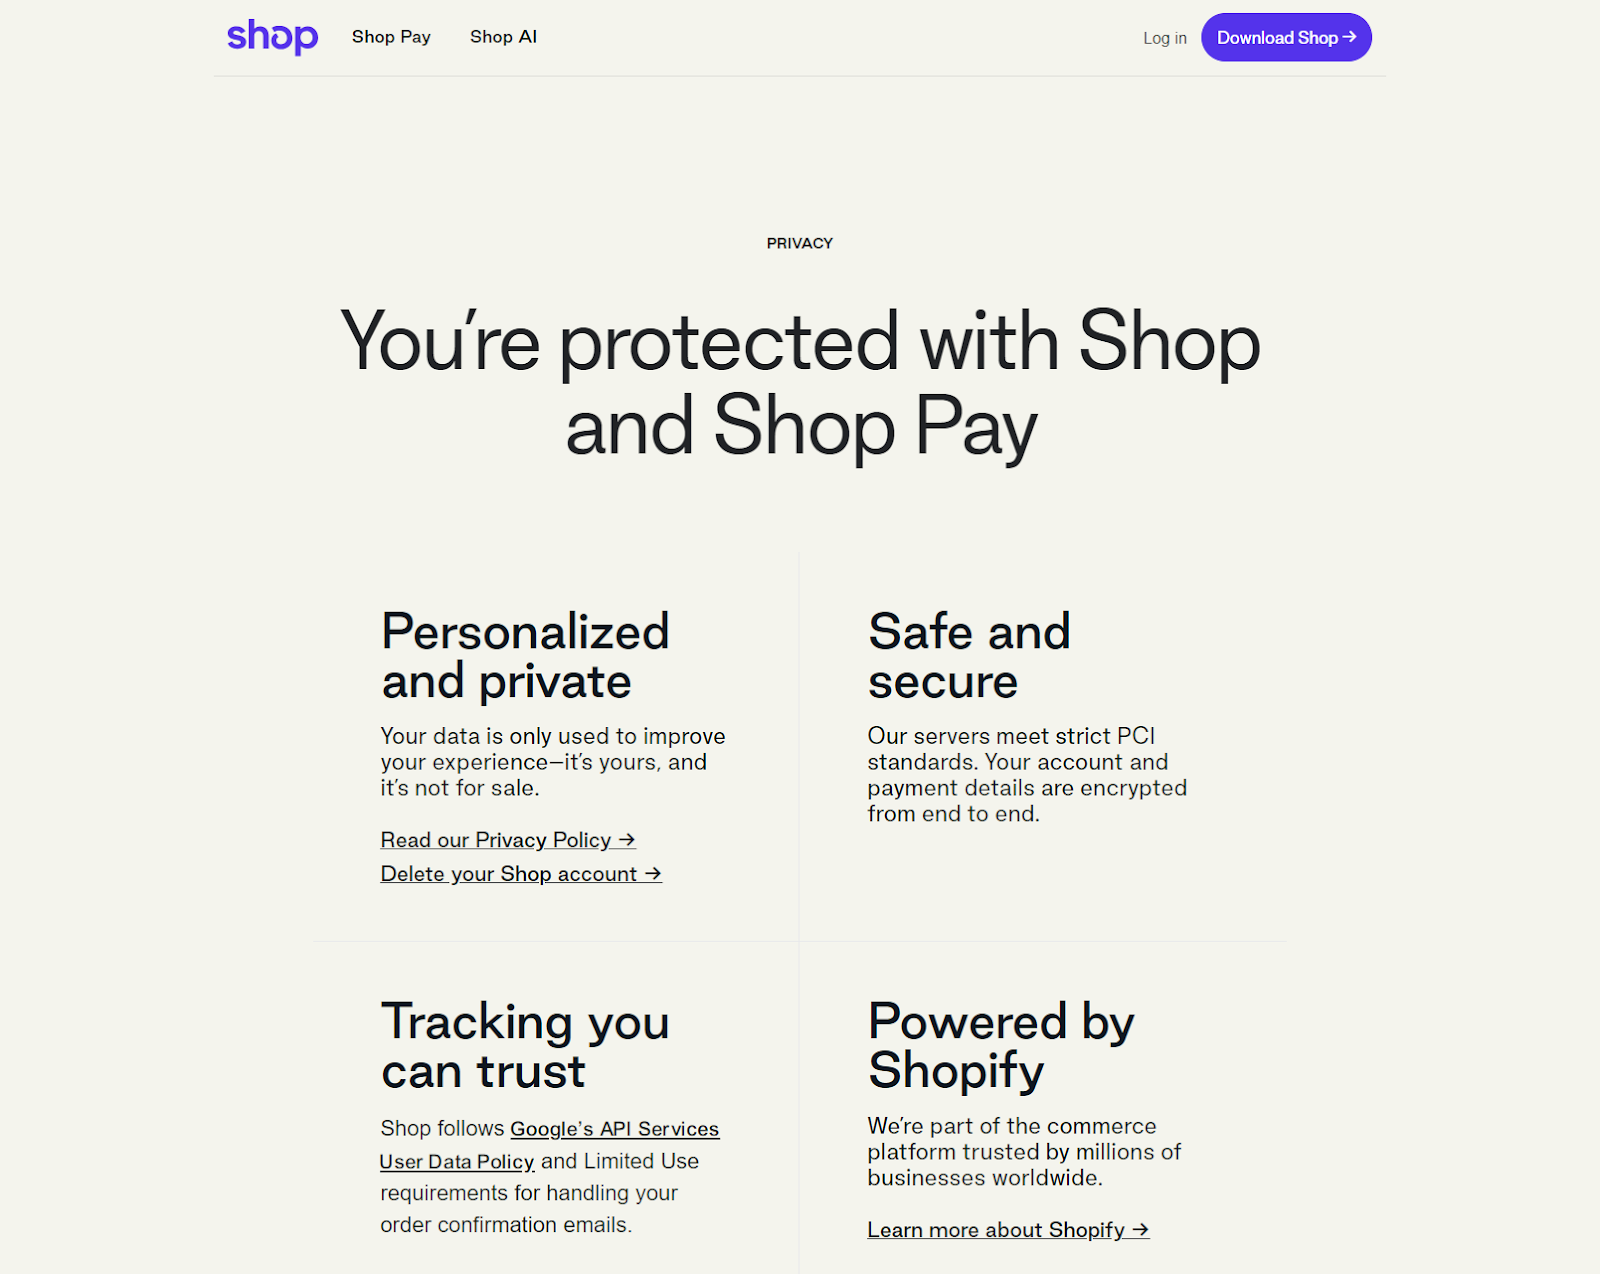 shop pay security information page